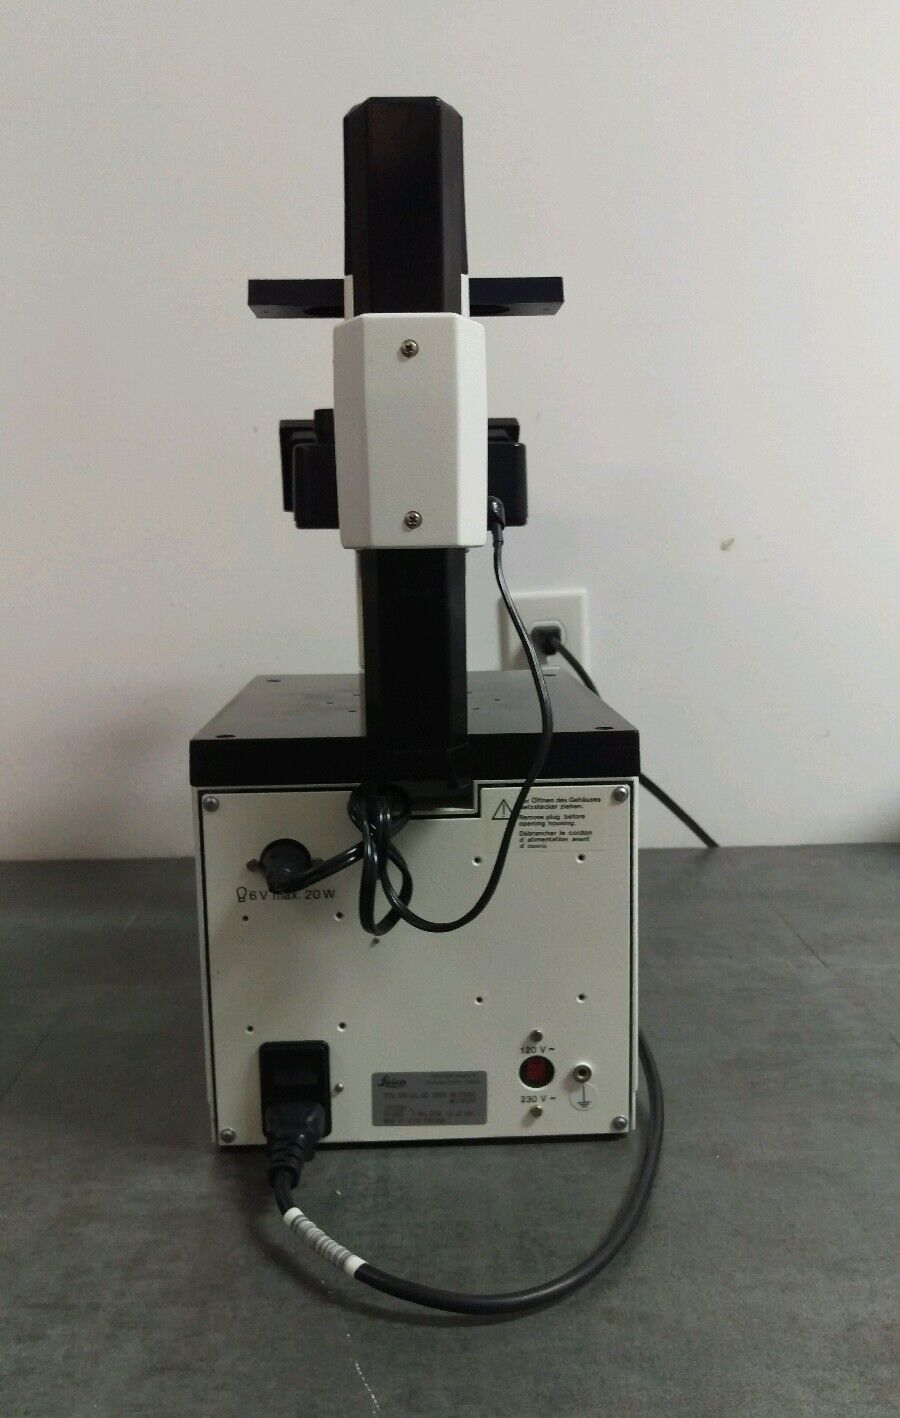 Leica Leitz Microscope DM IL Inverted with Phase Contrast and Trinocular Head - microscopemarketplace